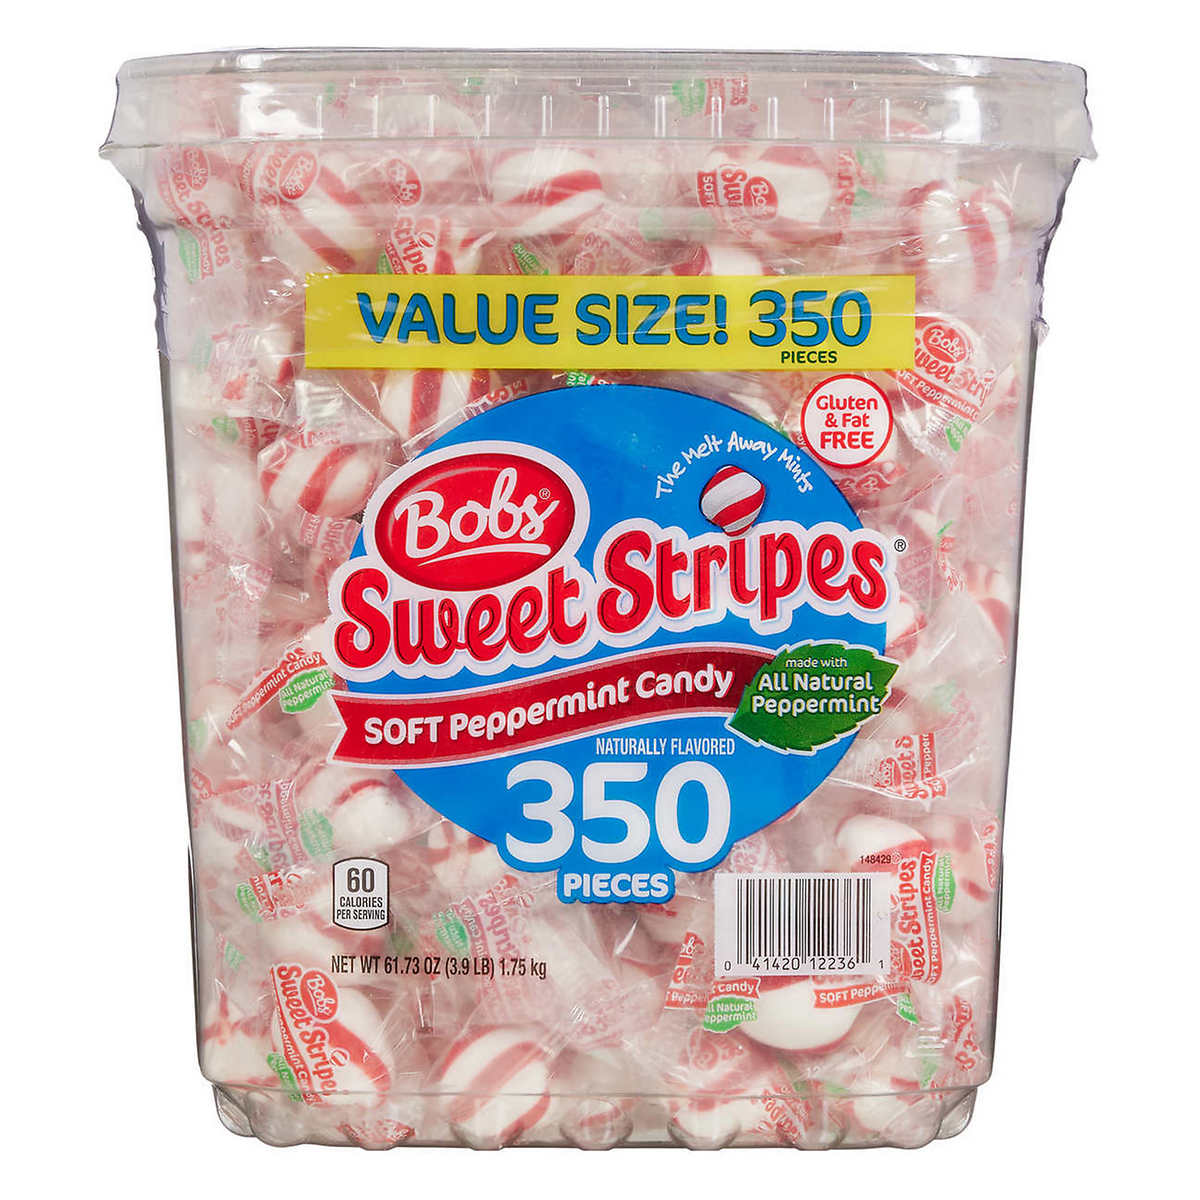 Bob's Sweet Stripes Soft Peppermint Candy, 350-Count